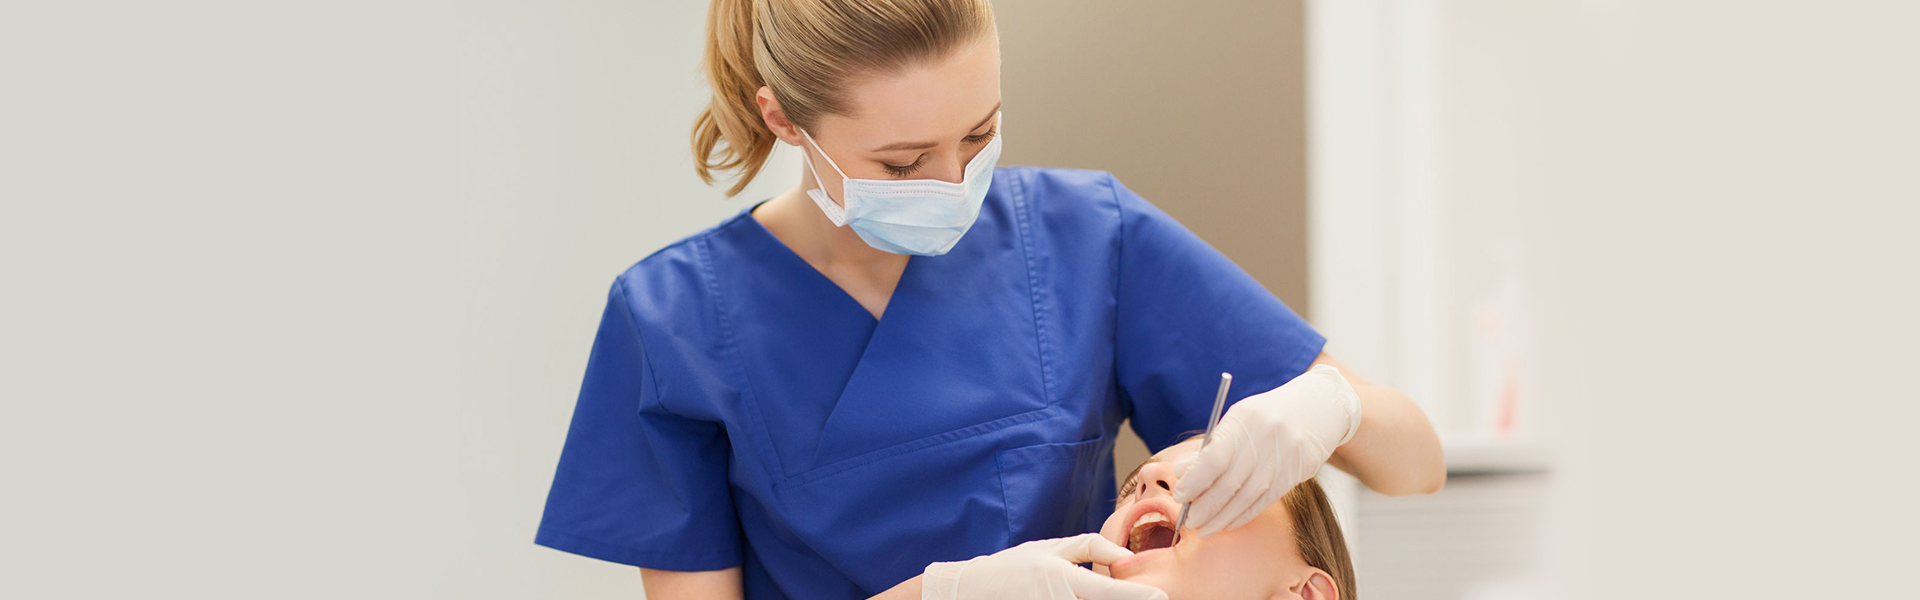 What to Expect During Dental Checkups?